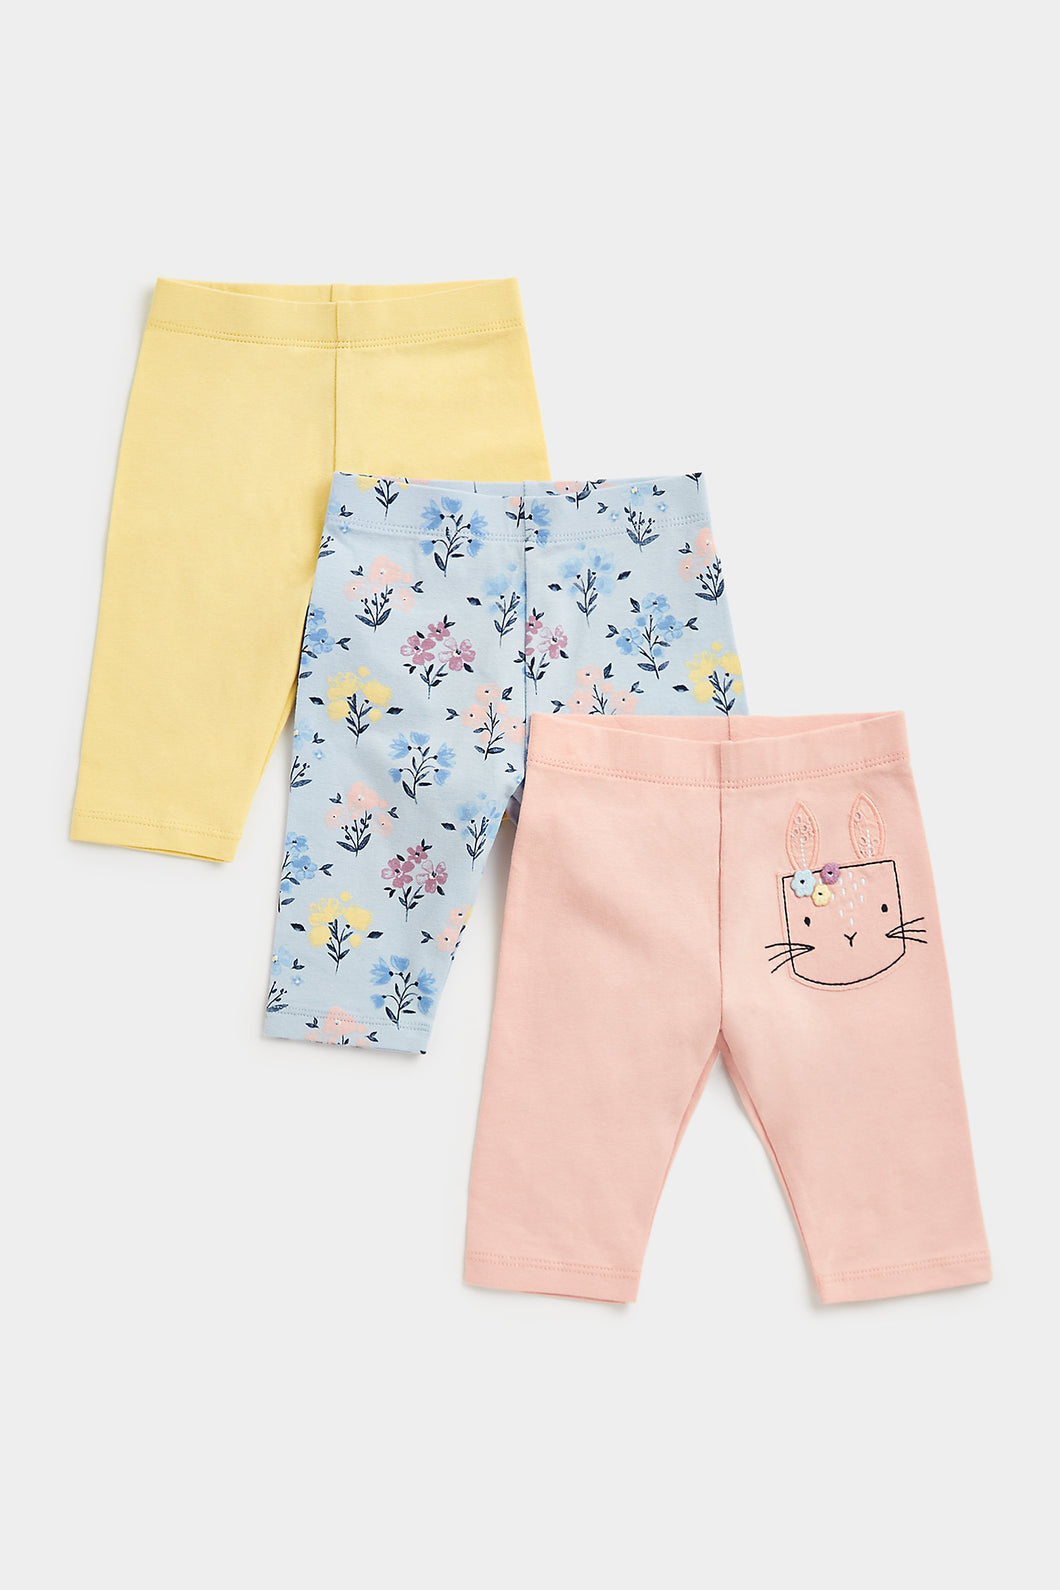 Mothercare Bunny Cropped Leggings - 3 Pack